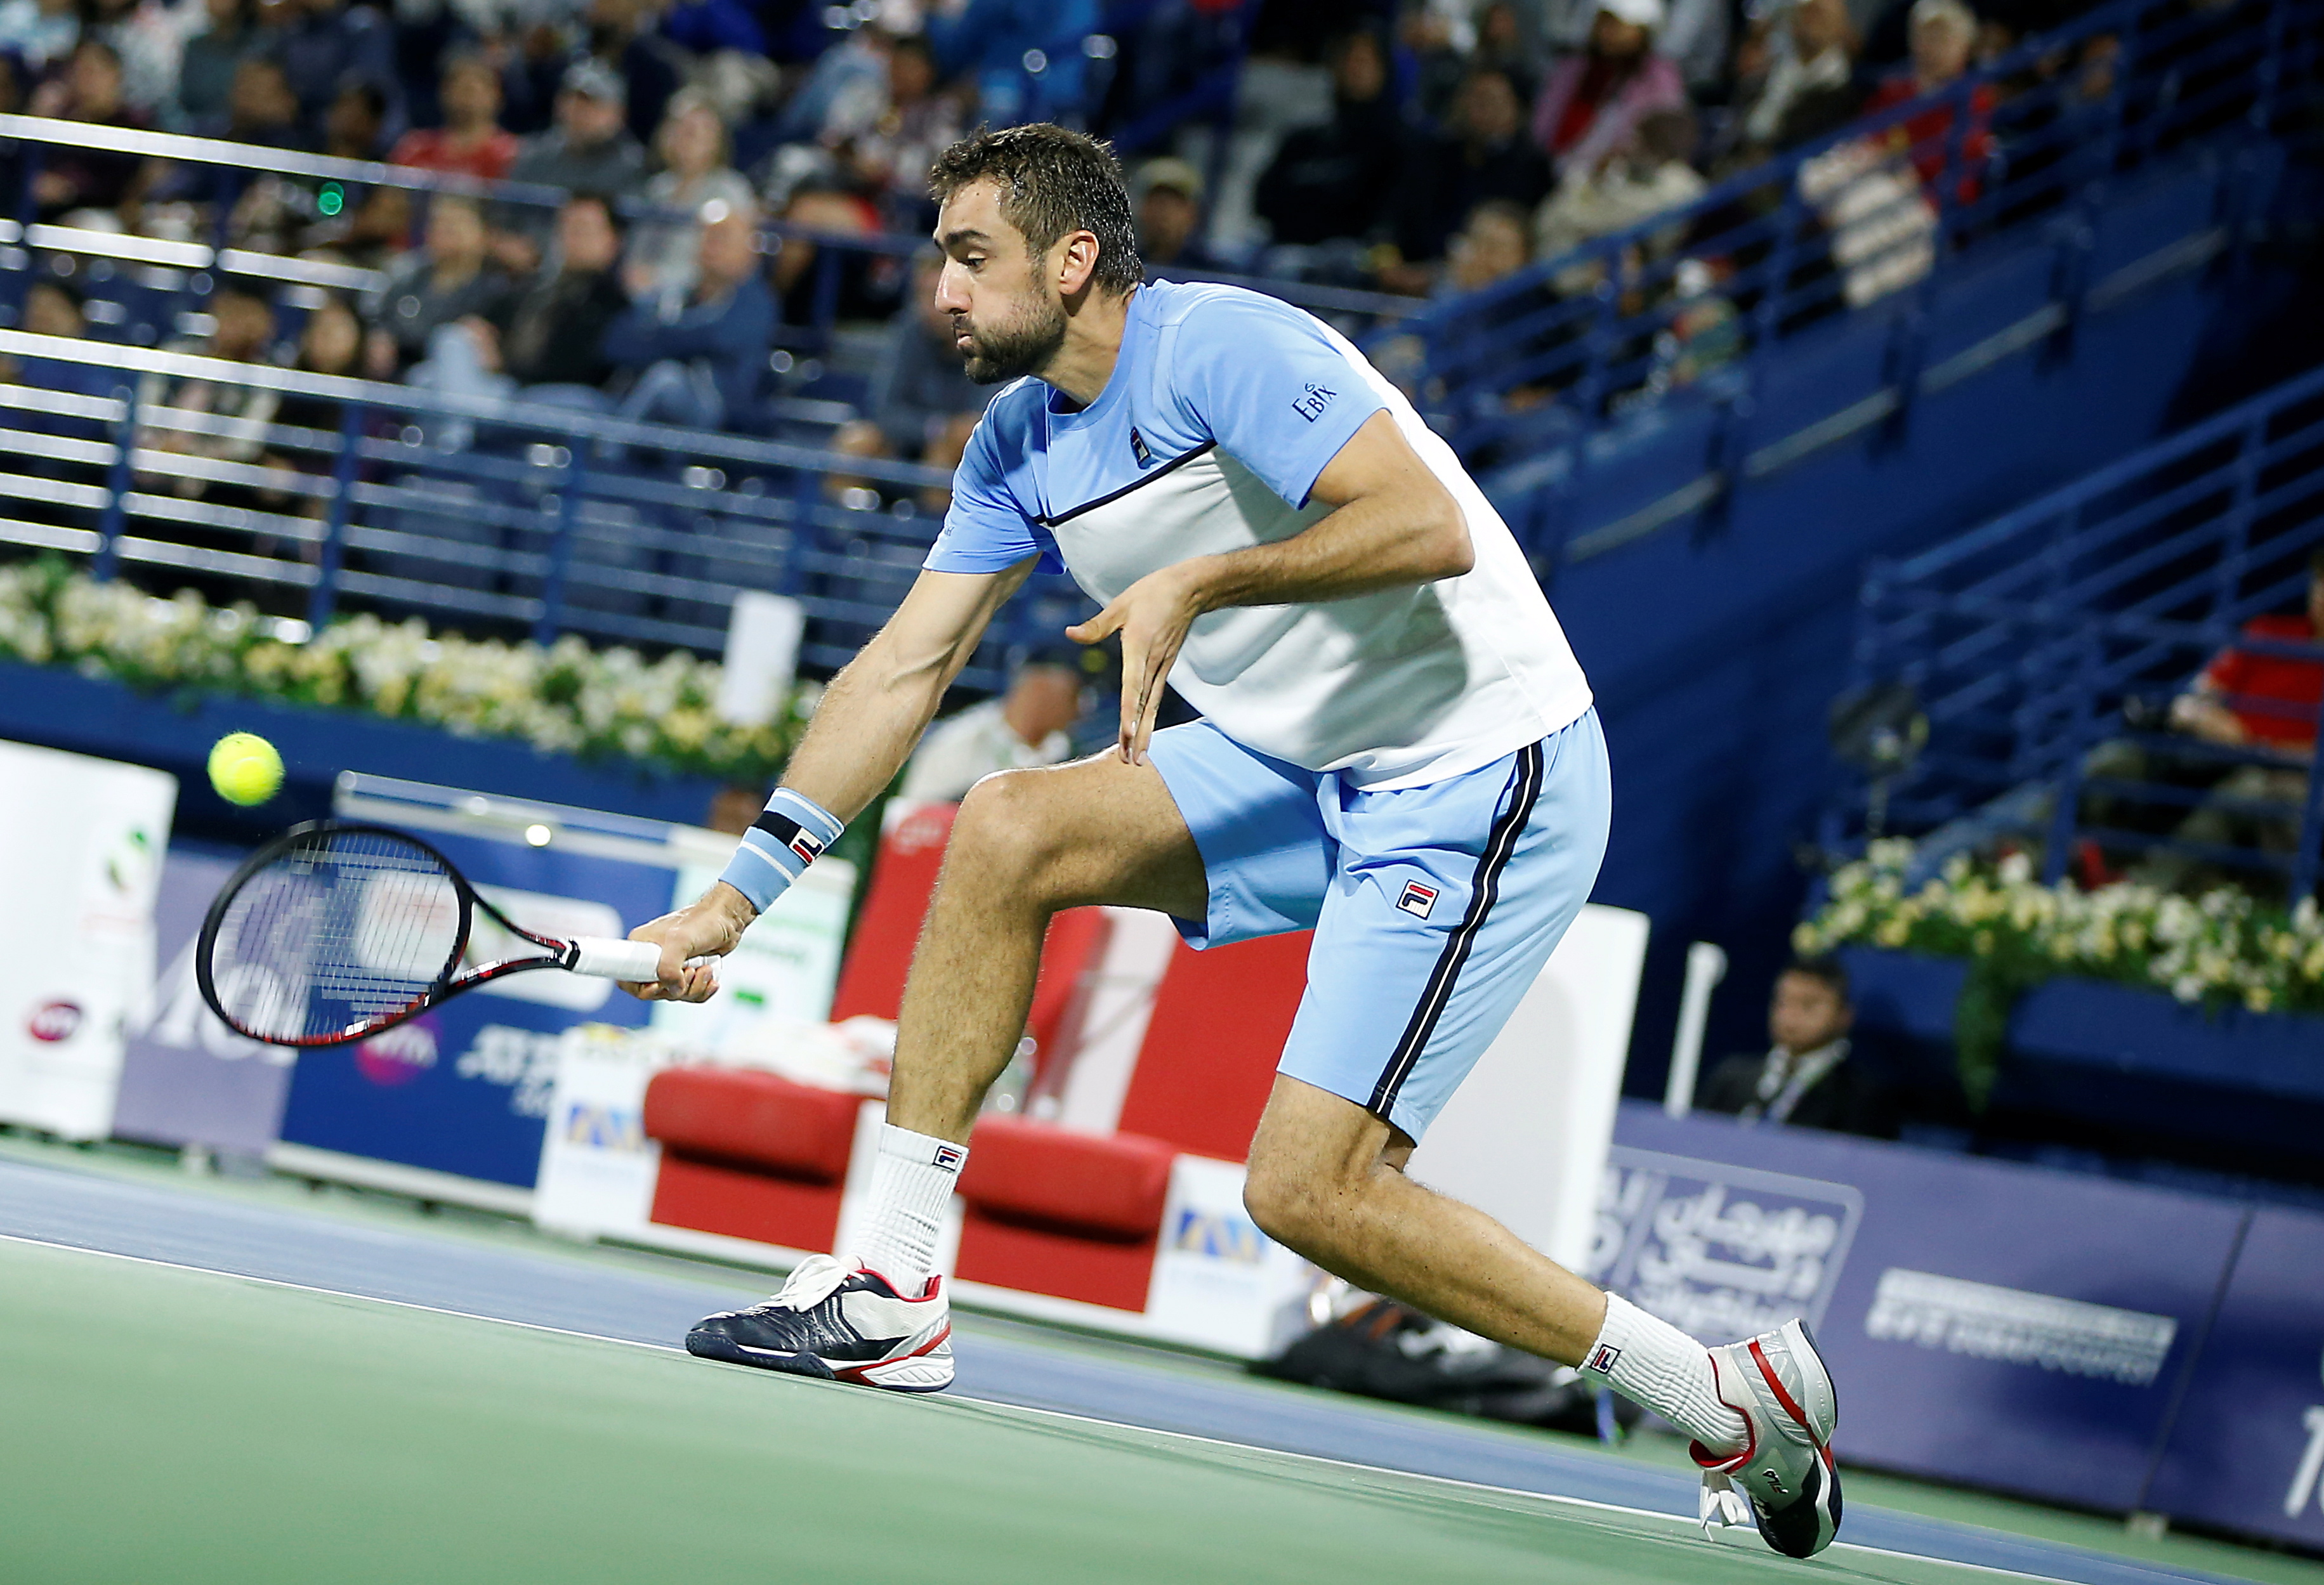 epa07399242 Marin Cilic of Croatia in action during his first round match against Gael Monfils of France at the Dubai Duty Free Tennis ATP Championships 2019 in Dubai, United Arab Emirates, 26 February 2019.  EPA/ALI HAIDER